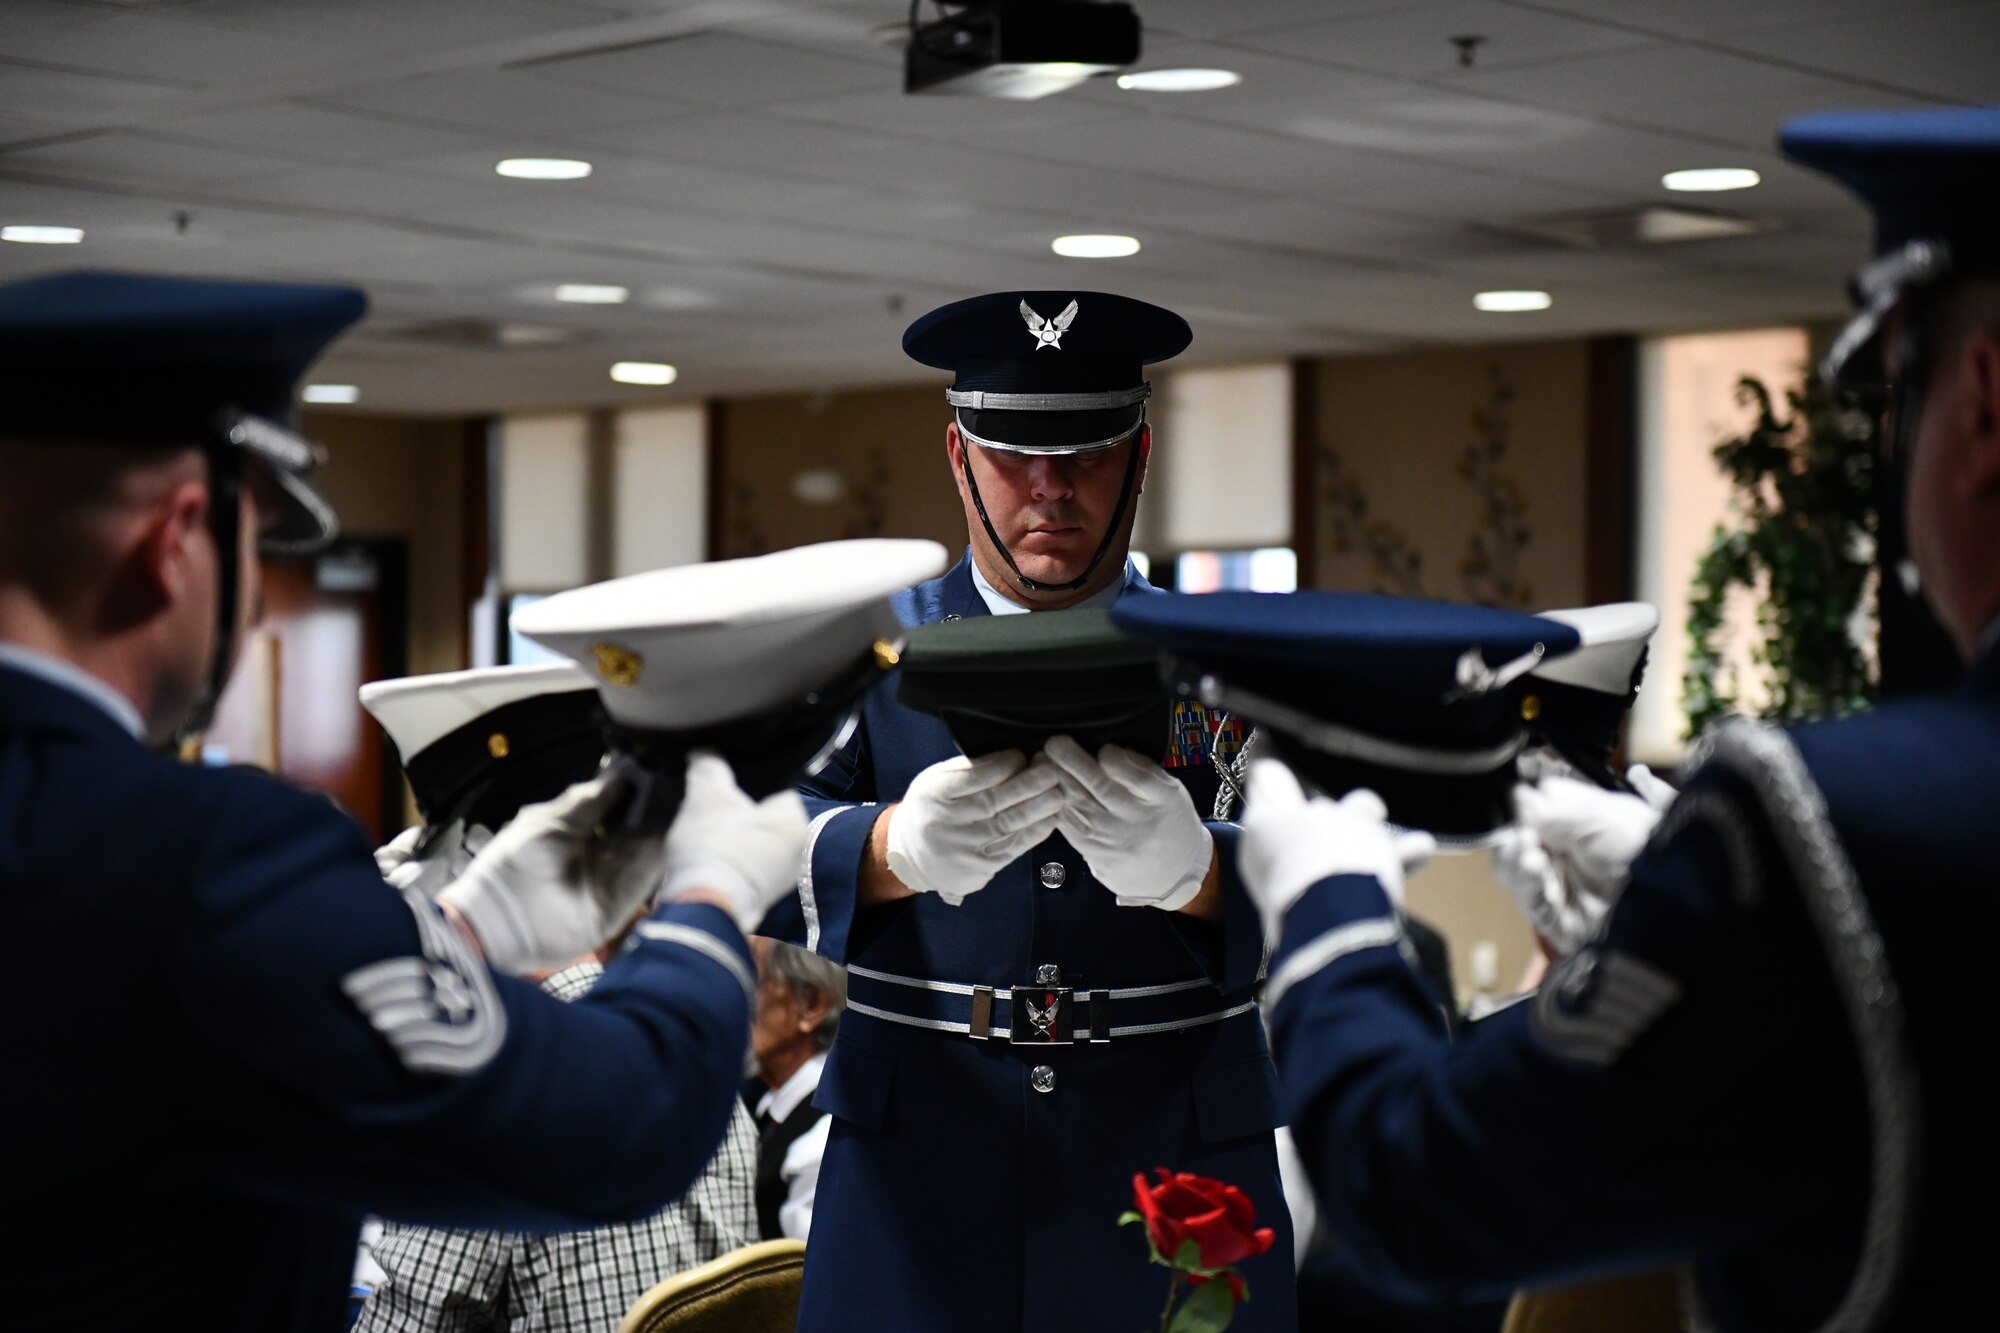 Members of the 910th Airlift Wing's color guard place hats representing the U.S. branches of military service during a missing man table ceremony at a chief induction ceremony at Youngstown Air Reserve Station, Ohio, Oct. 15, 2022.